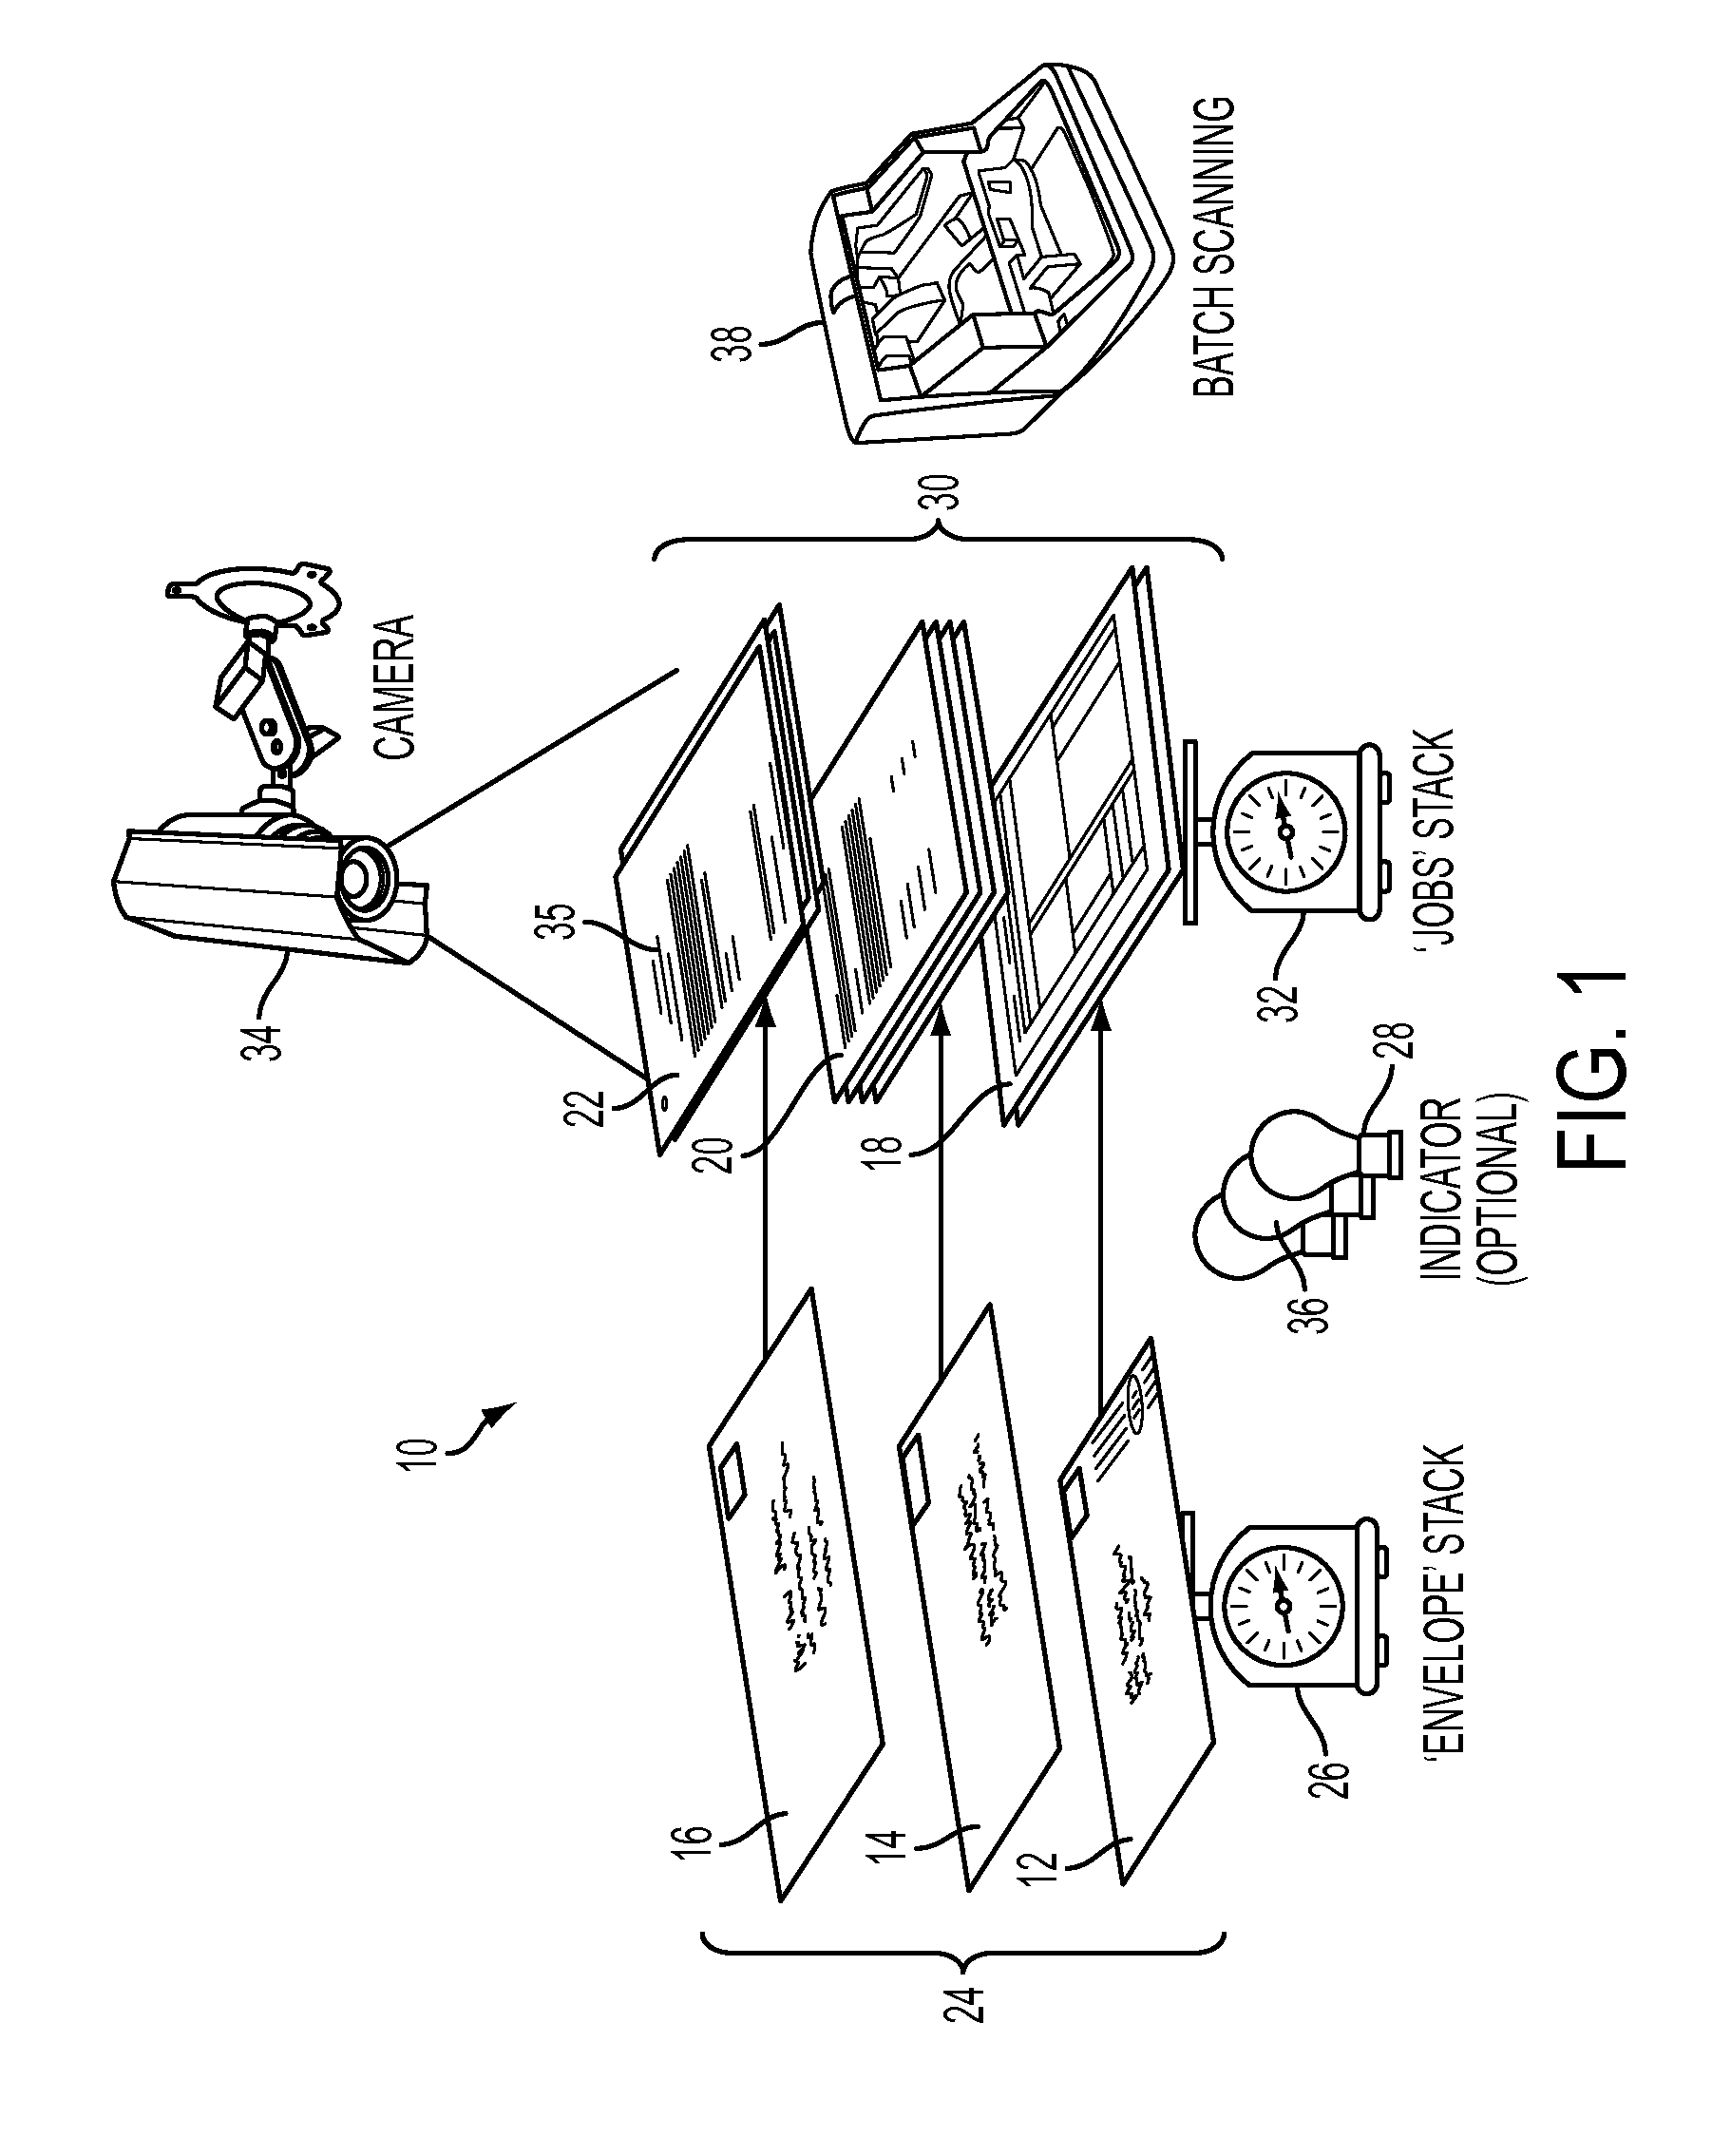 Document separation by document sequence reconstruction based on information capture